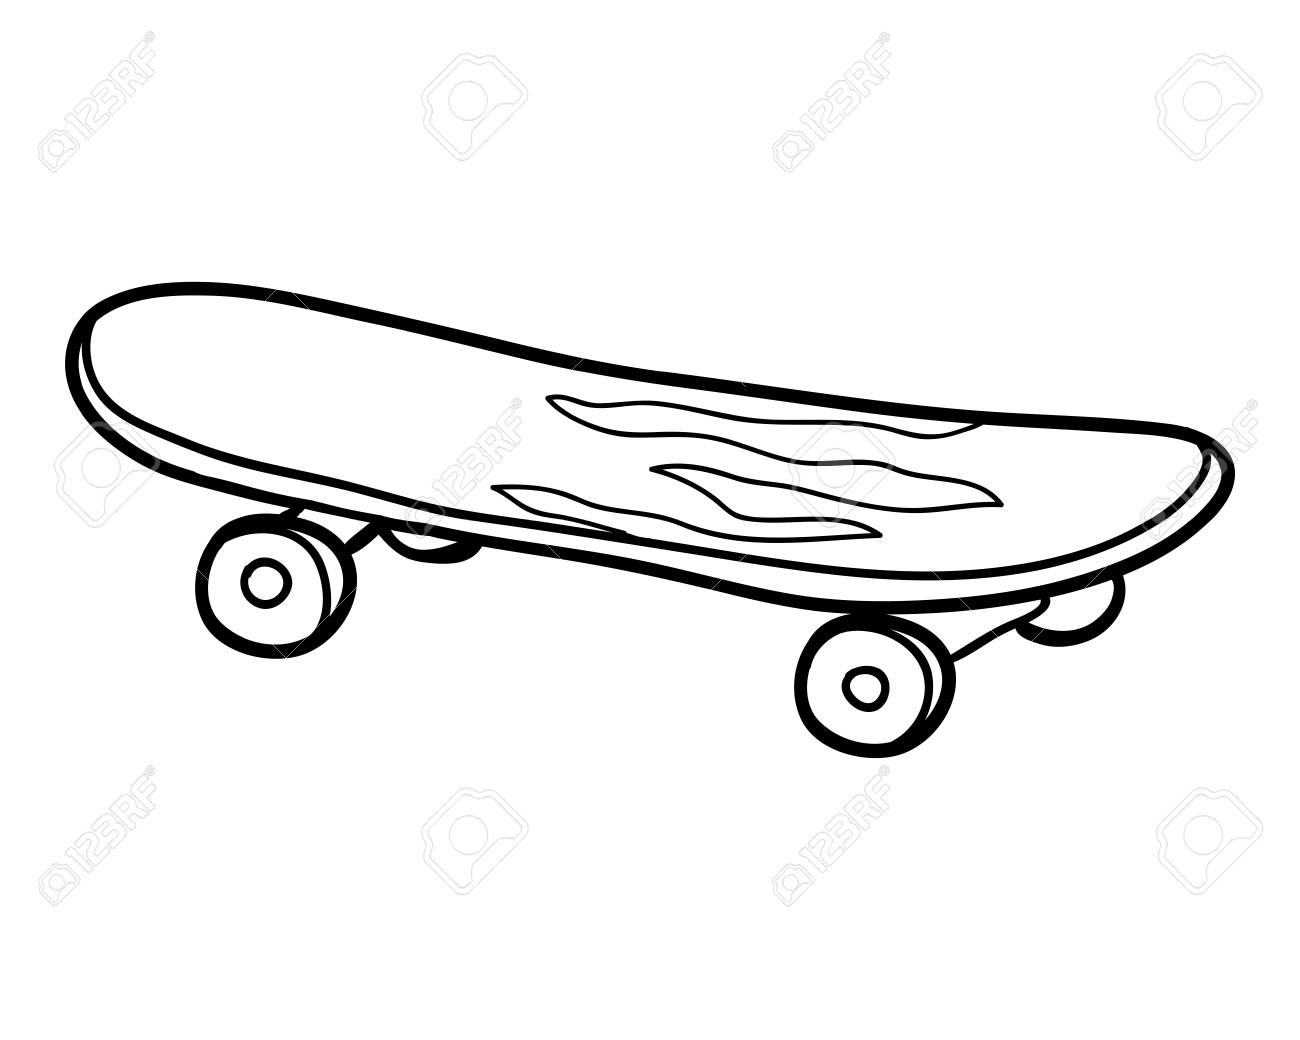 Coloring book for children skateboard royalty free svg cliparts vectors and stock illustration image